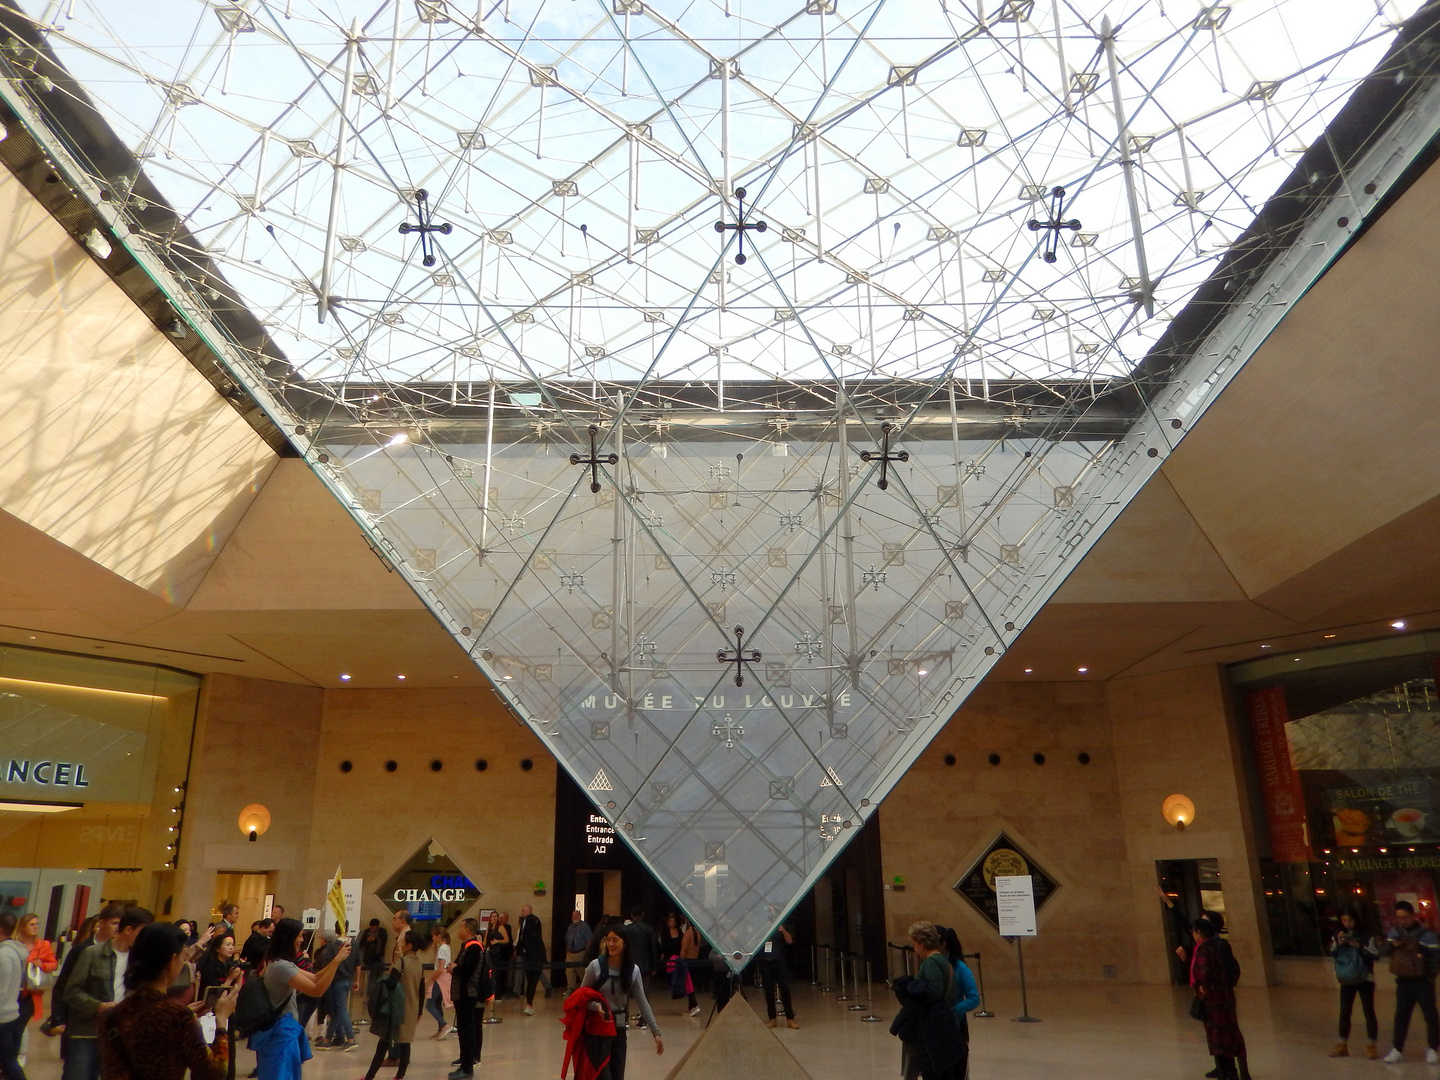 Inverted pyramid Le Louvre